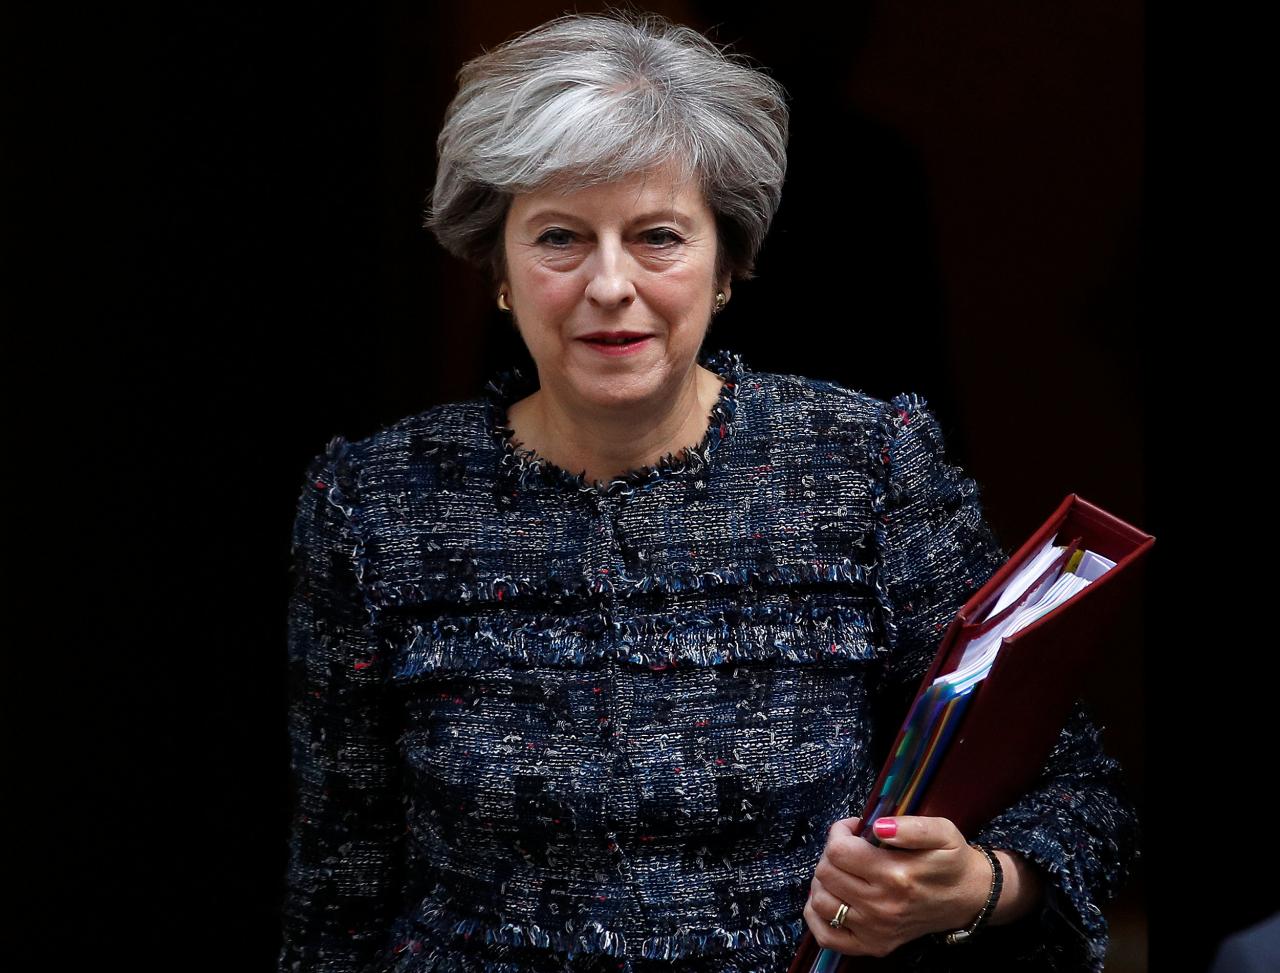 Britain's Prime Minister Theresa May had requested the EU defer Friday’s exit until June 30 but in Brussels a “flex tension” until the end of the year or until March 2020 was being discussed, EU diplomats said.